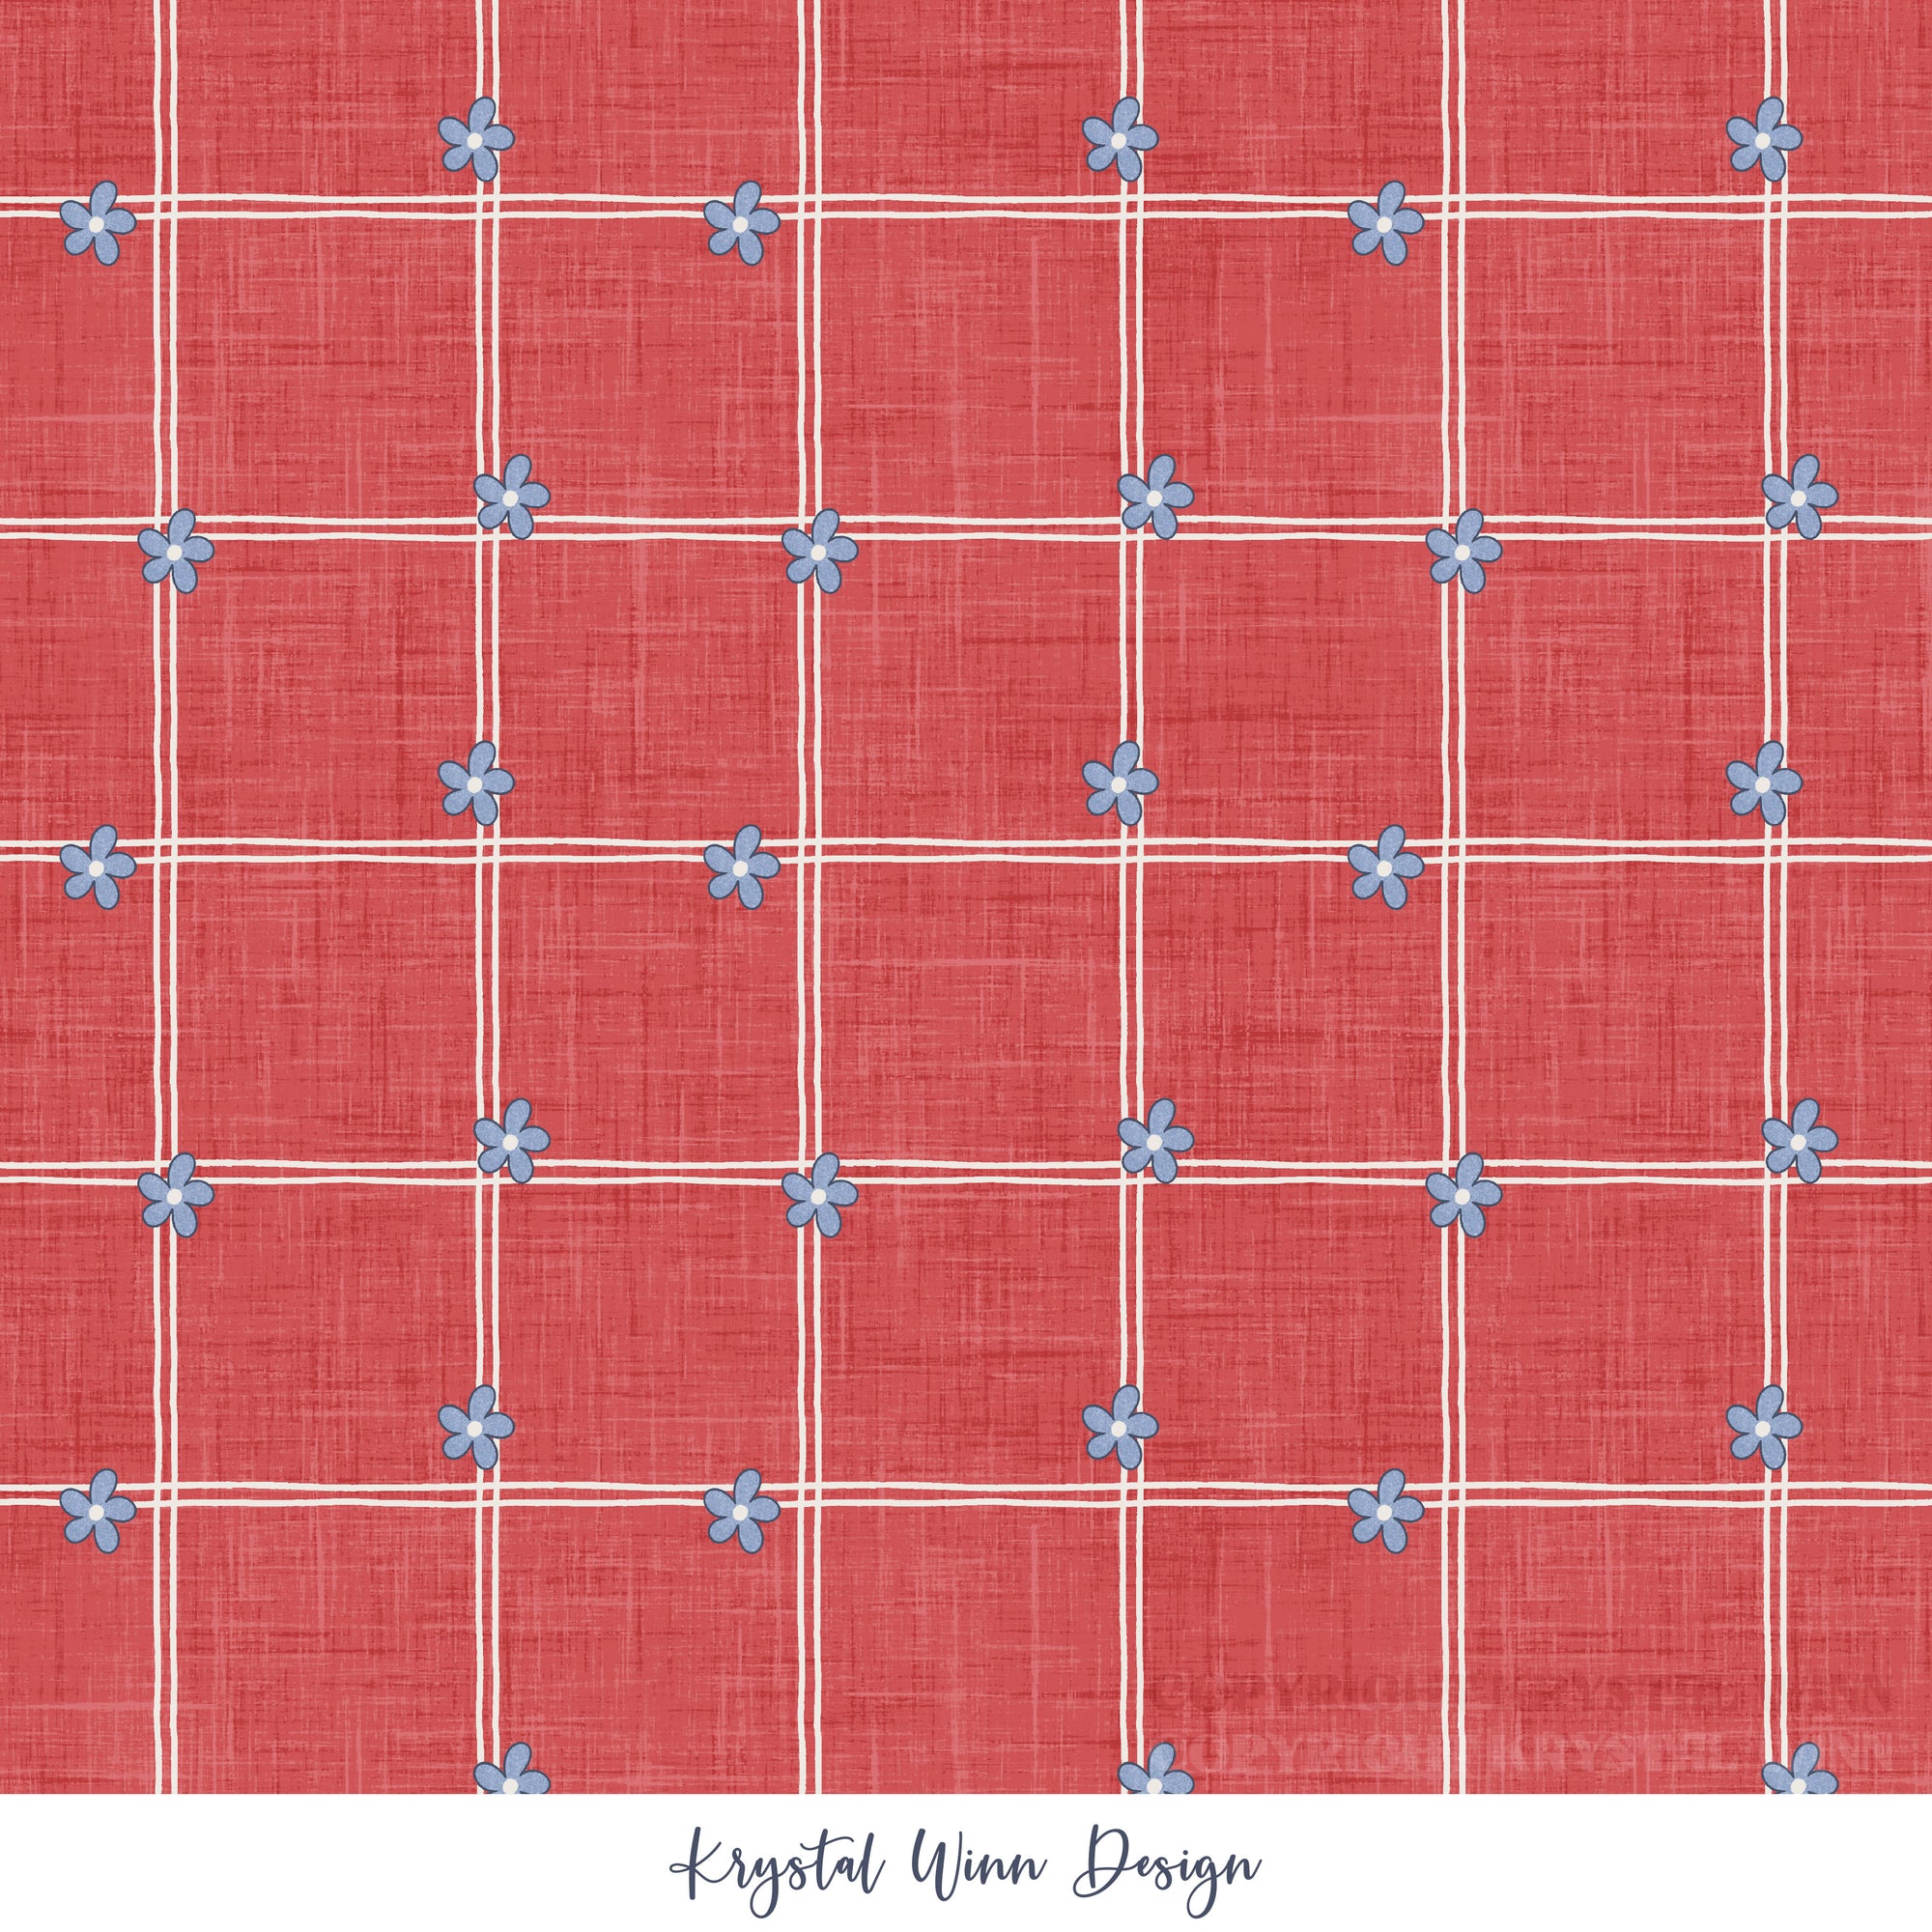 Yankee Doodle Flower Plaid Red